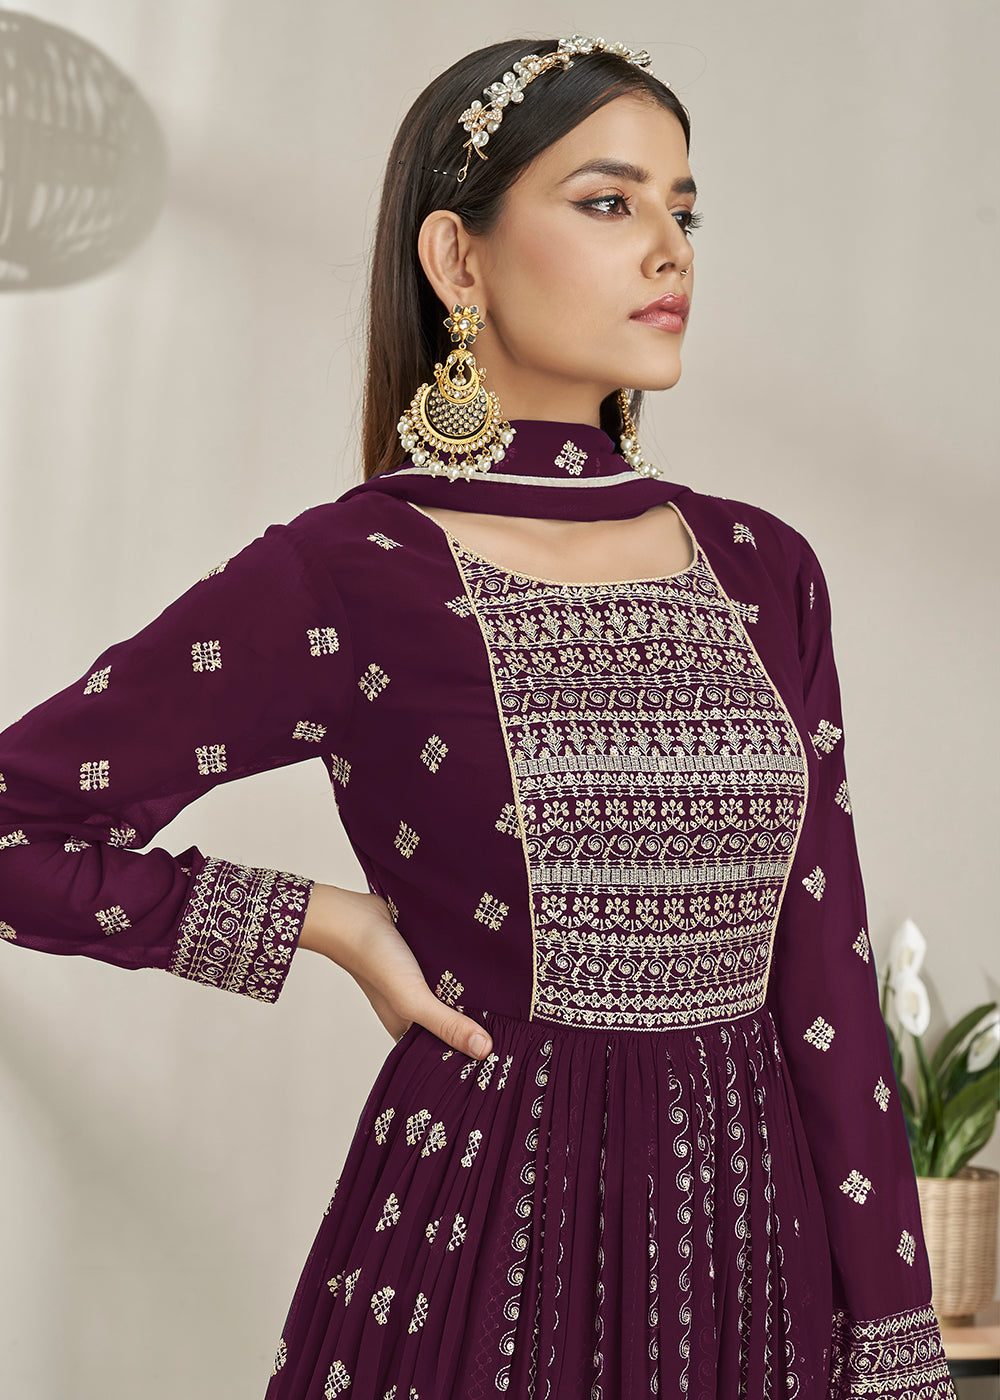 Buy Now Glamourous Party Style Violet Long Top Style Palazzo Suit Online in USA, UK, Canada & Worldwide at Empress Clothing. 